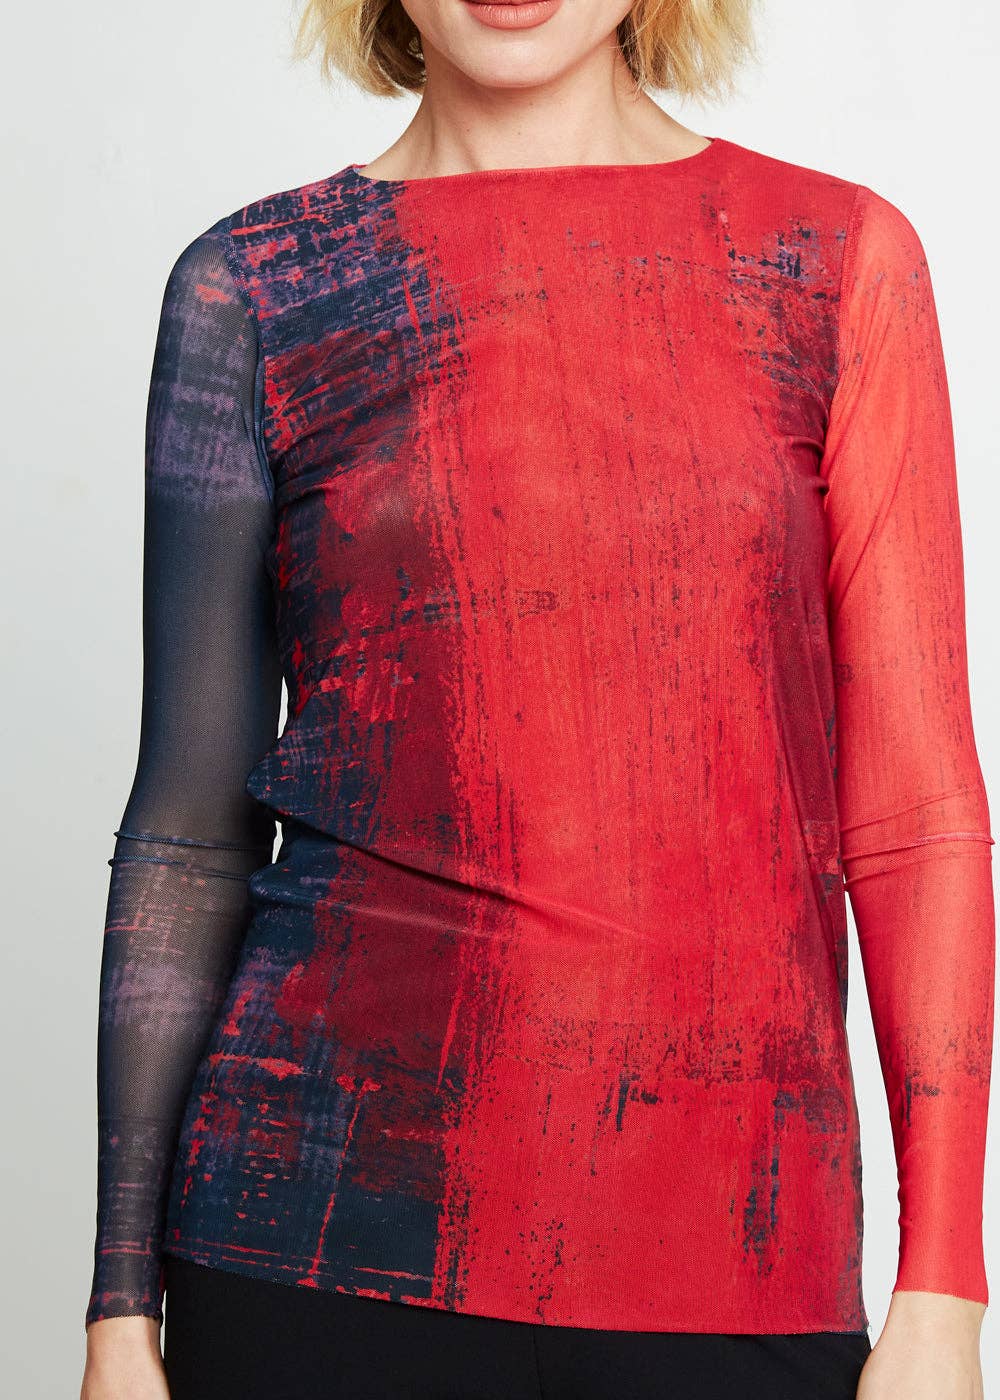 AMB Designs - Vermillion - Florence Double Sheer Top